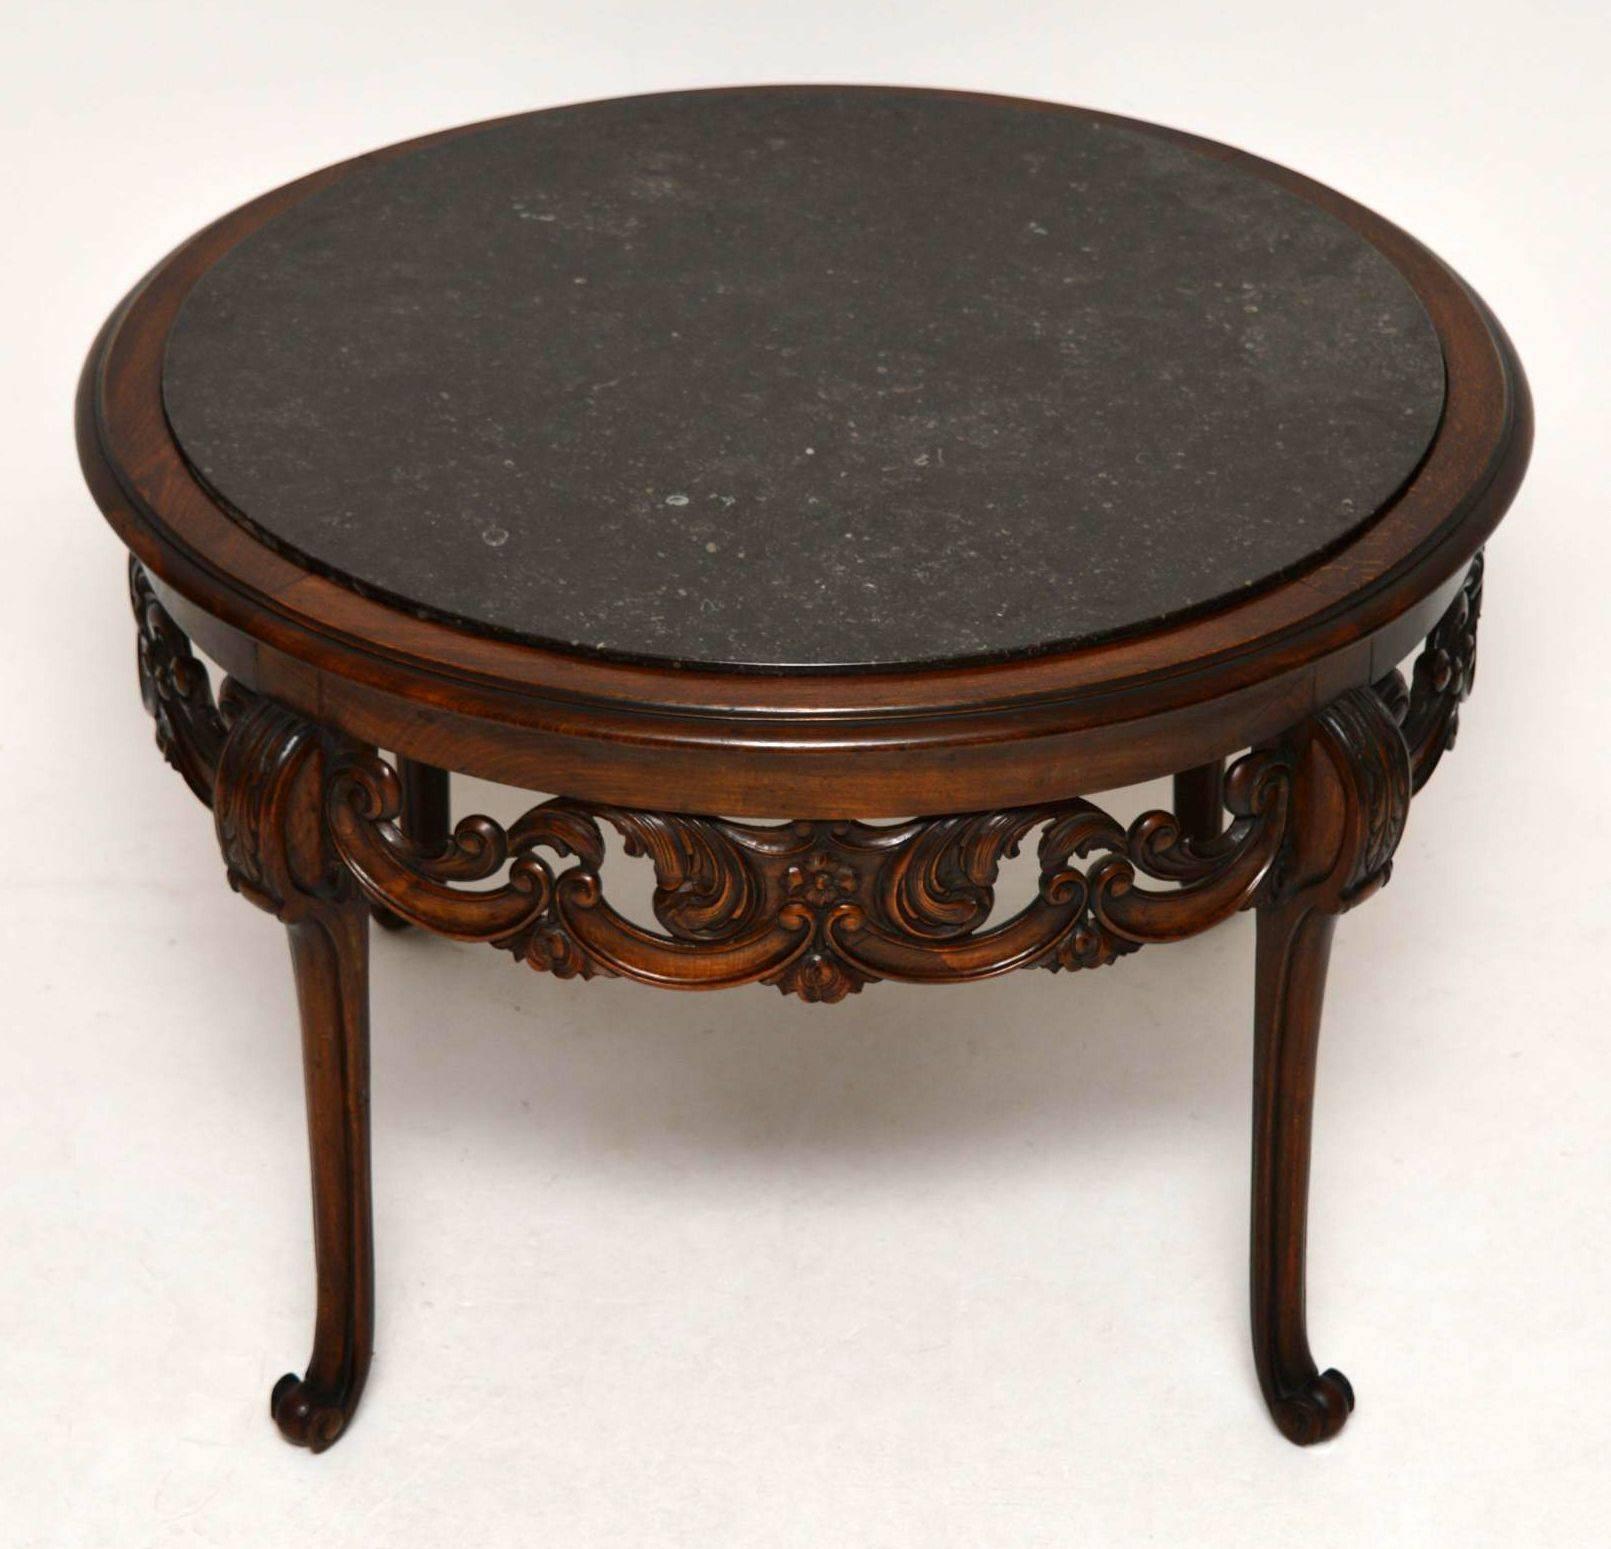 Antique Swedish marble top carved walnut coffee table in good original condition. I would date this table to around the 1890-1900 period and it came over from Sweden along with a matching three piece bergere suite, which can be found in the seating